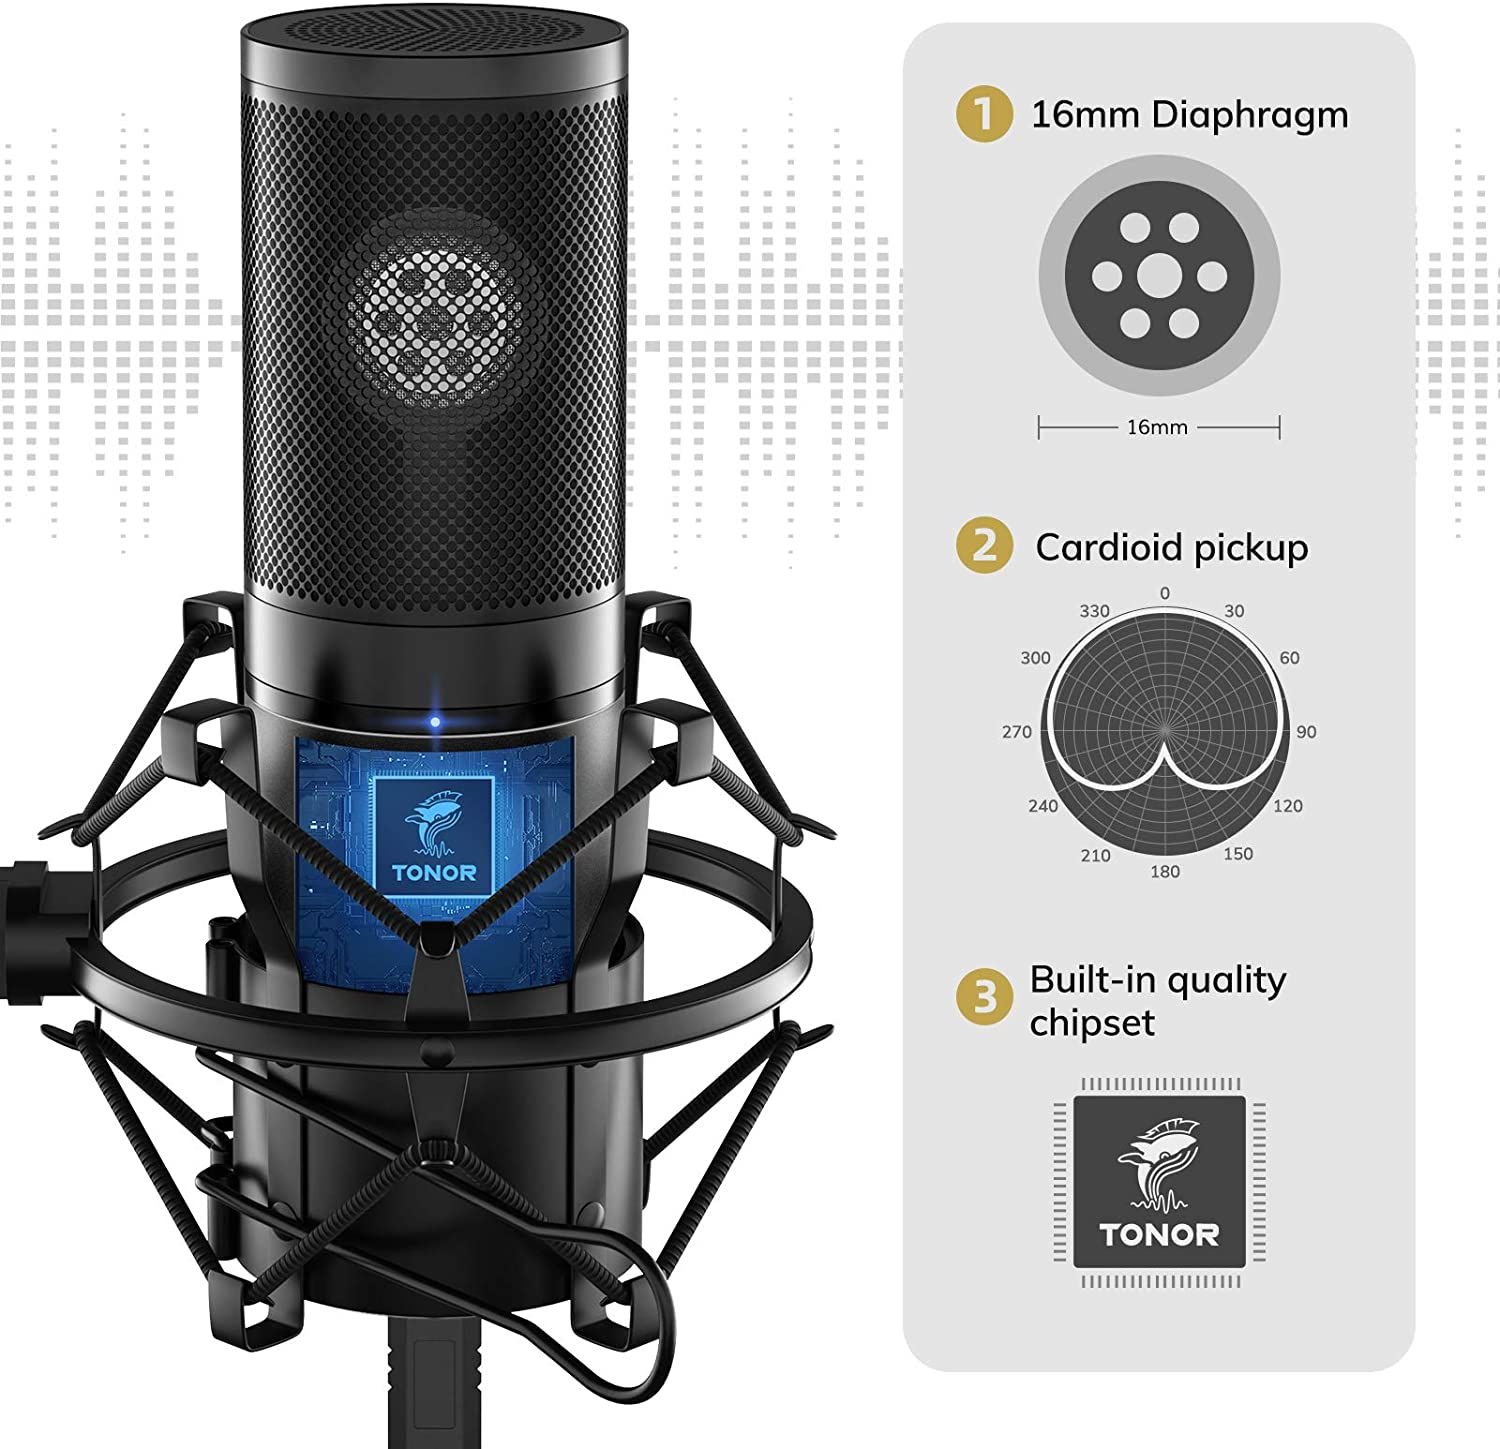 A visual showing features of USB Mic Tonor Kit